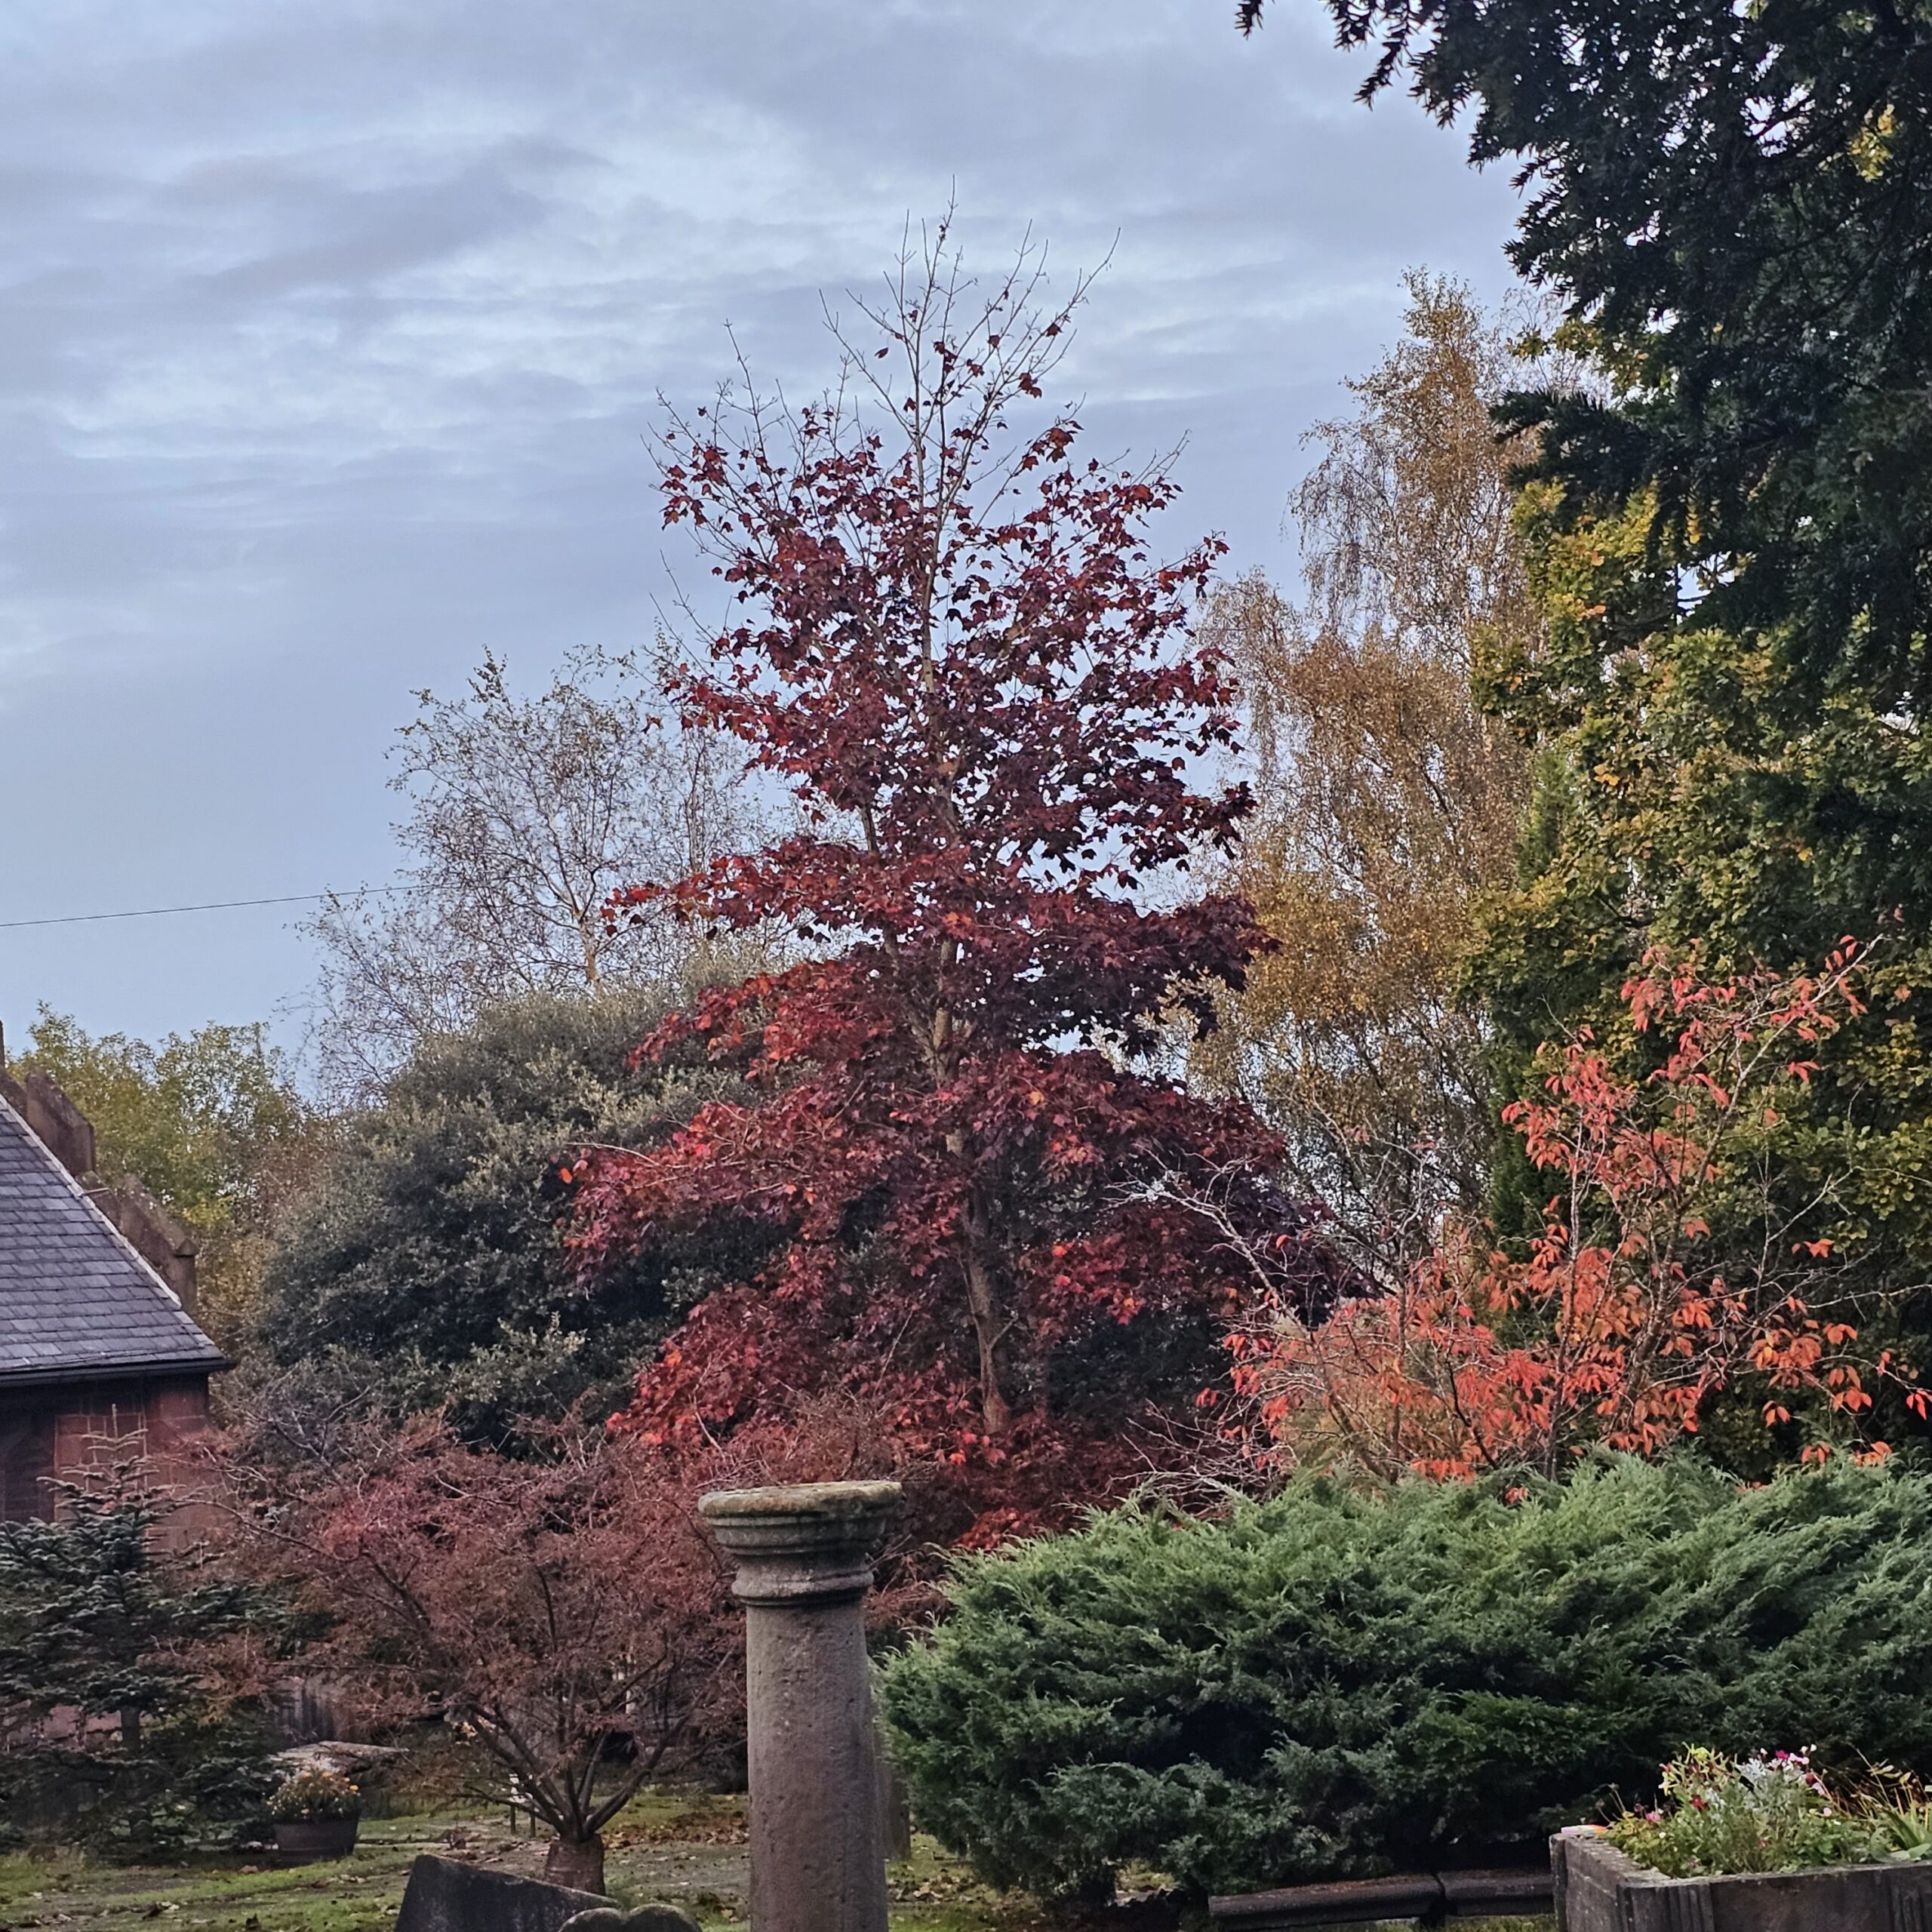 A green Bush and a red tree as well as some green trees. Colours of Autumn.